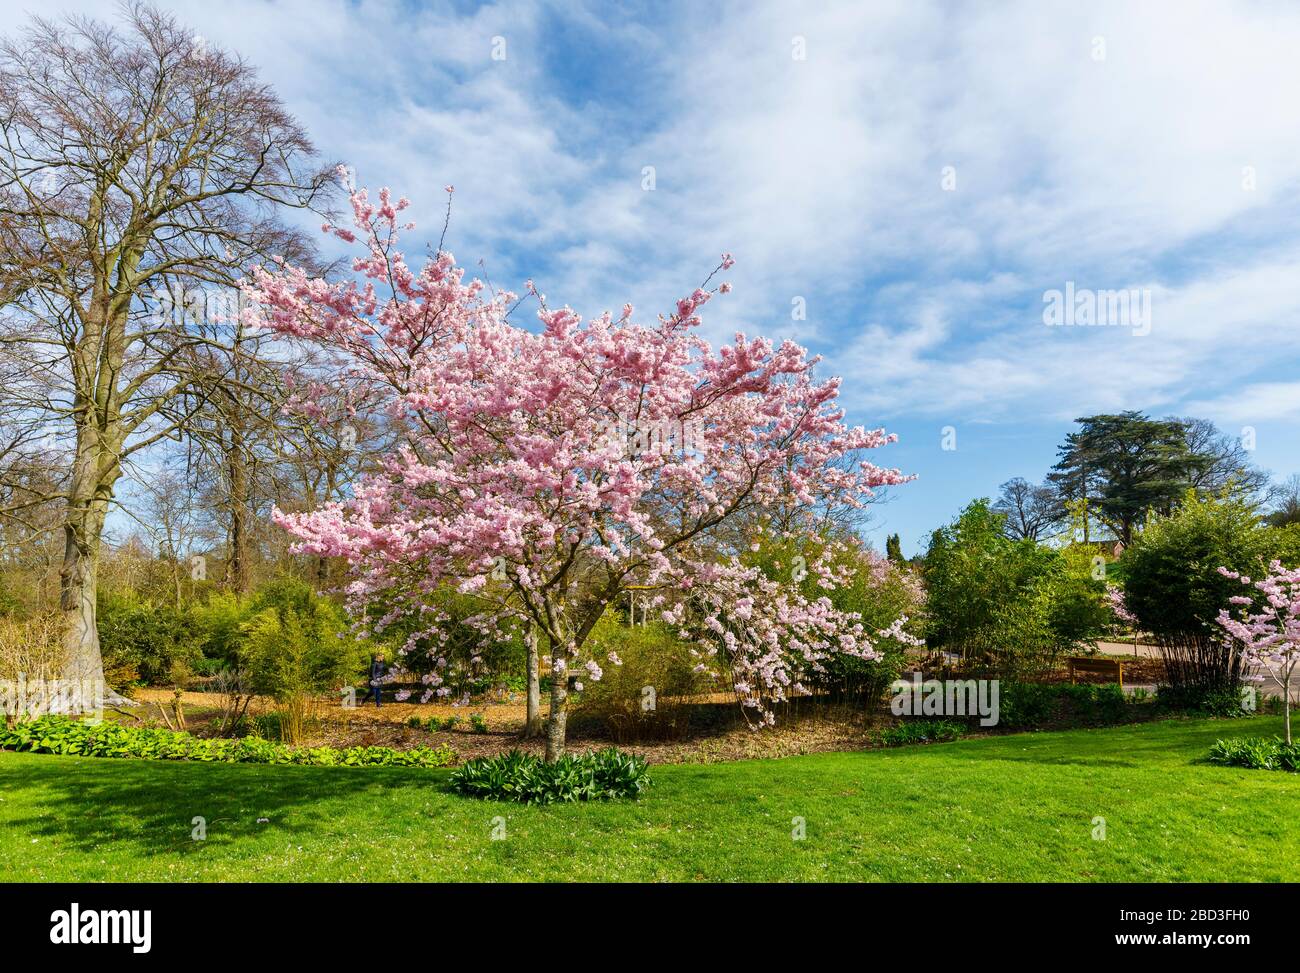 Small tree, clusters of pink semi-double blossoms of Prunus Accolade flowering cherry in blossom in spring on a sunny day, RHS Garden, Wisley, Surrey Stock Photo